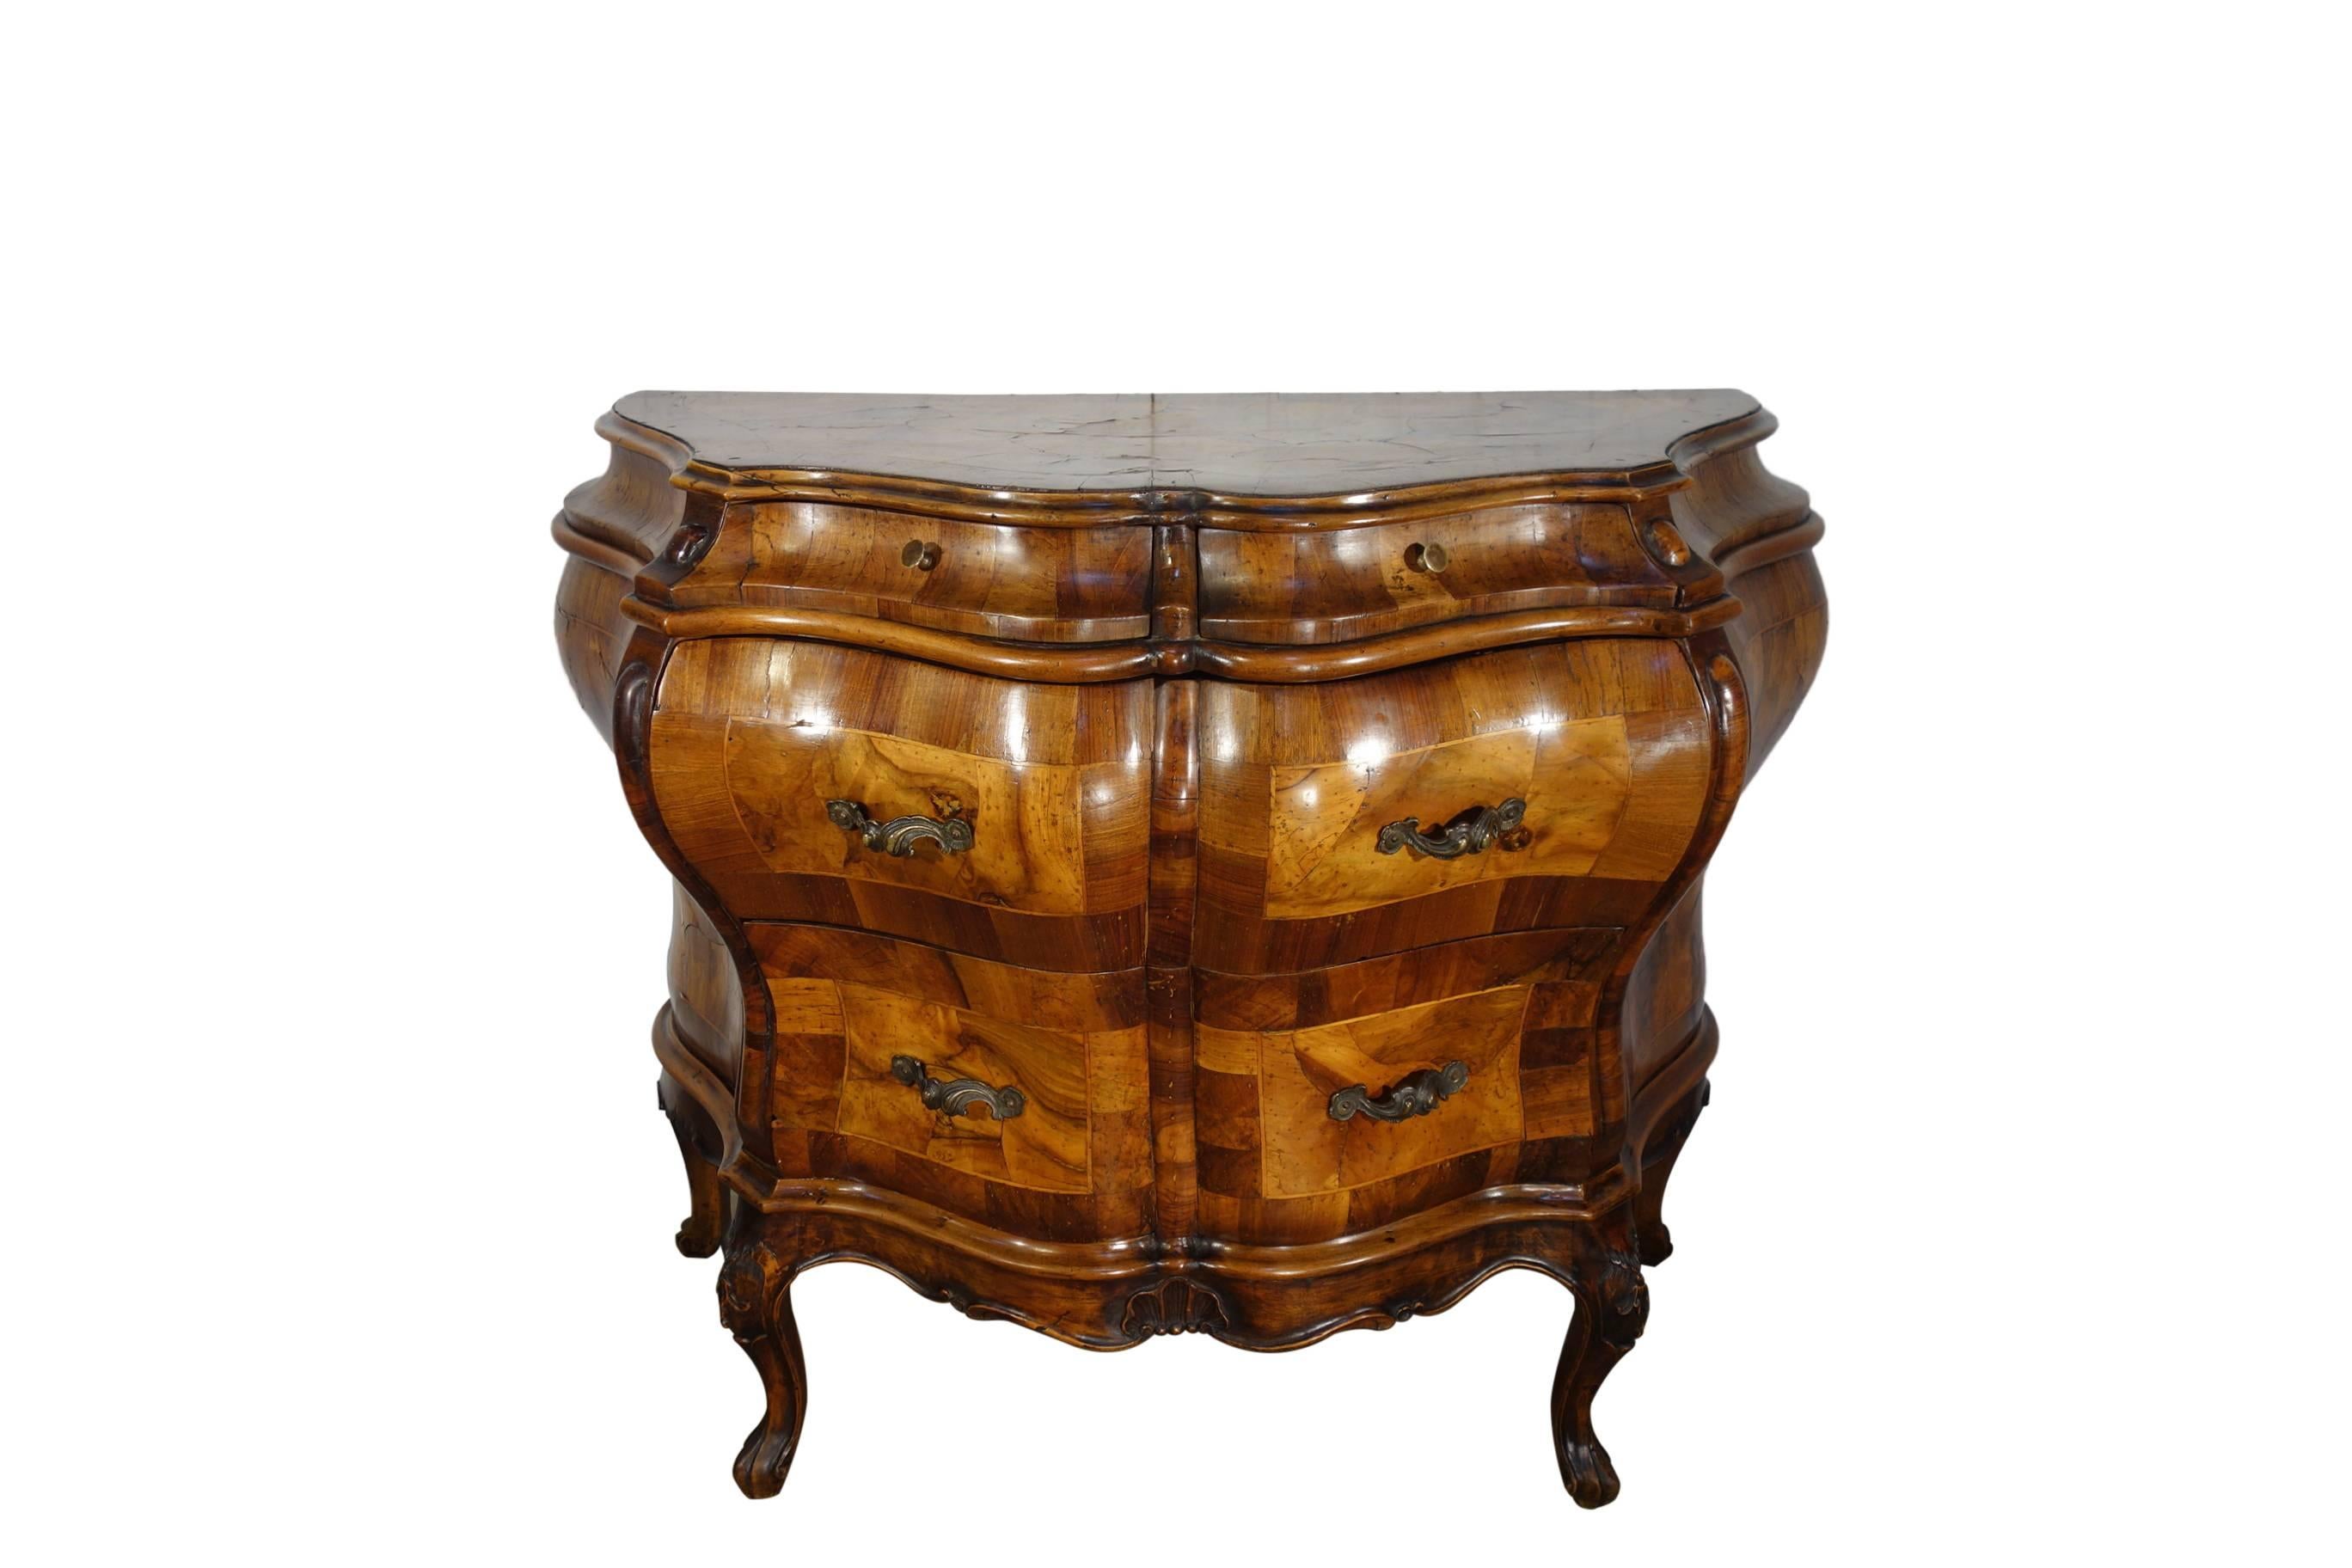 Lovely and striking commode of carved walnut solids, gorgeous burled veneers and inlays, featuring two upper small drawers and two larger lower drawers with fancy bronze hardware, early 20th Century Baroque Rococo Revival.

Dimensions:  39